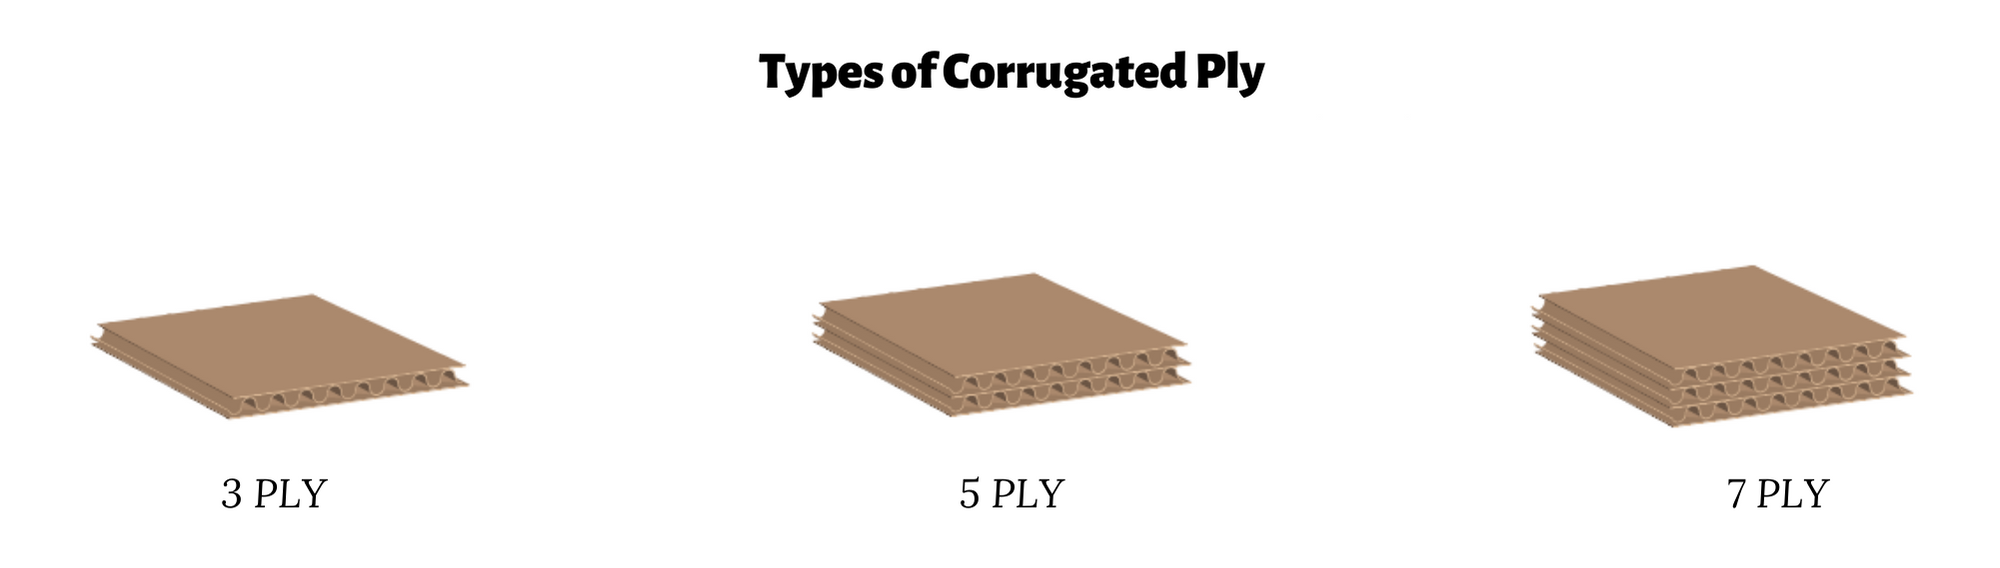 Corrugated Ply Types